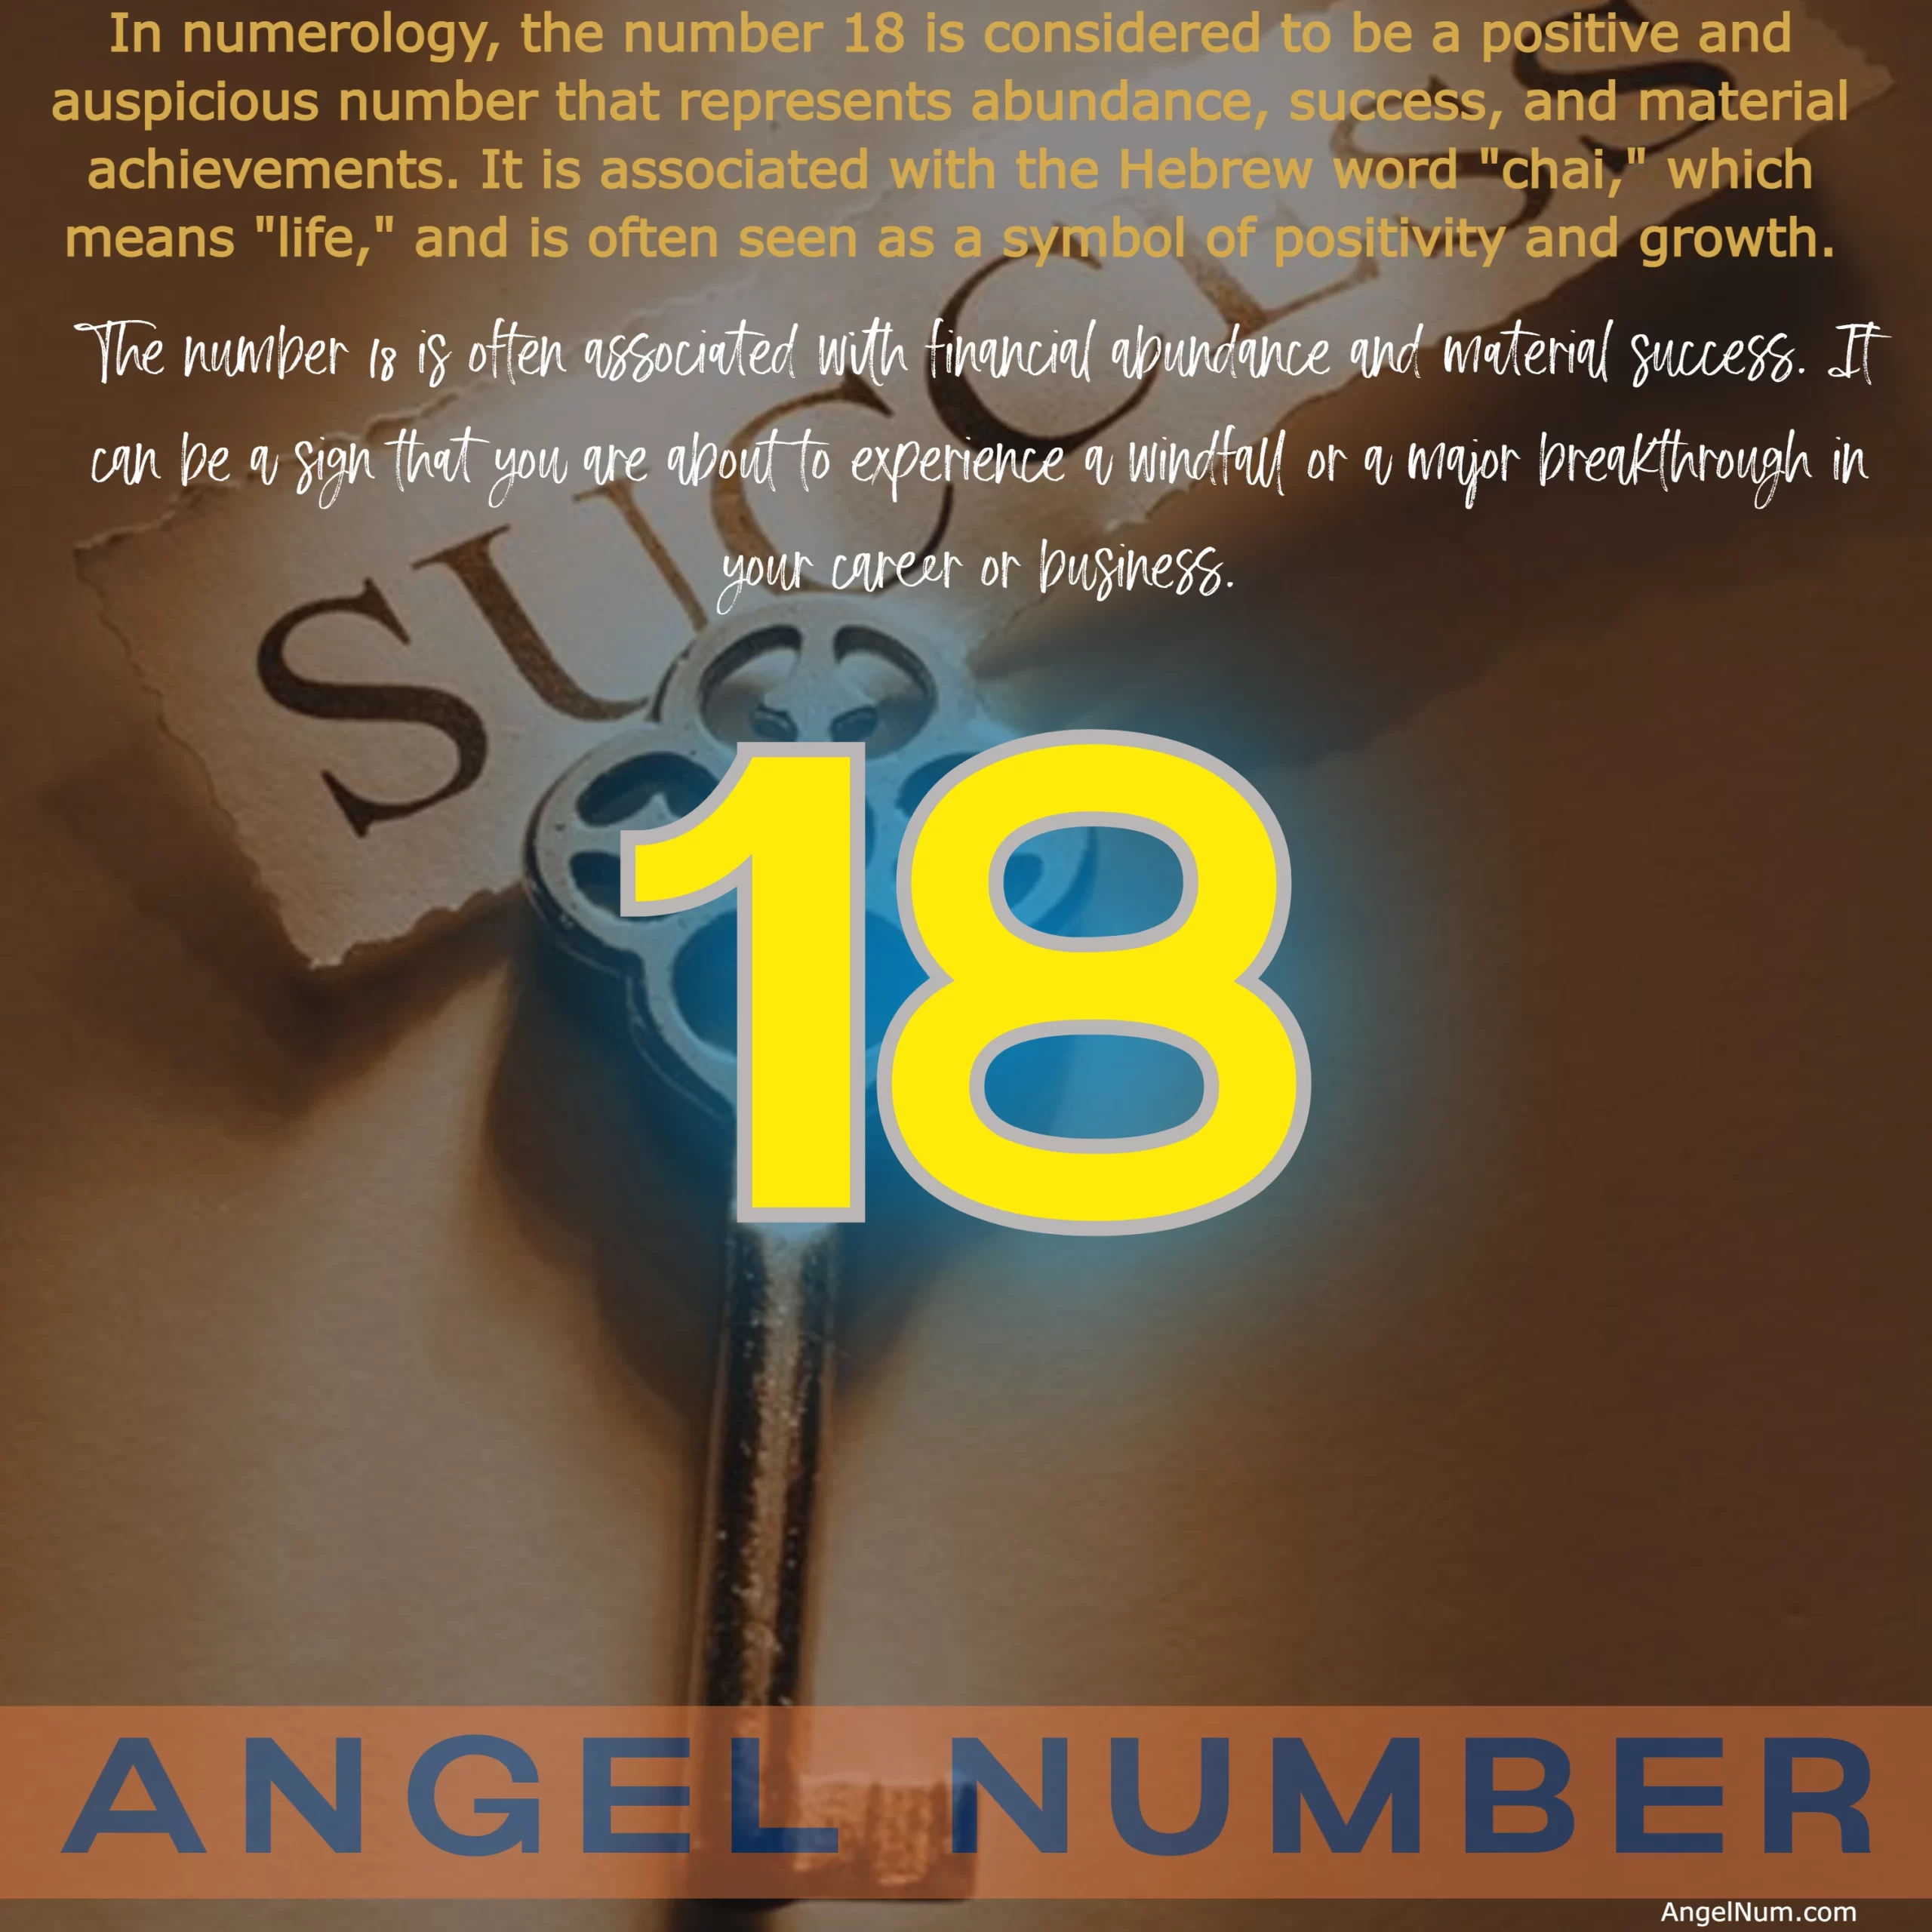 Angel Number 18: Meaning, Symbolism, and Significance